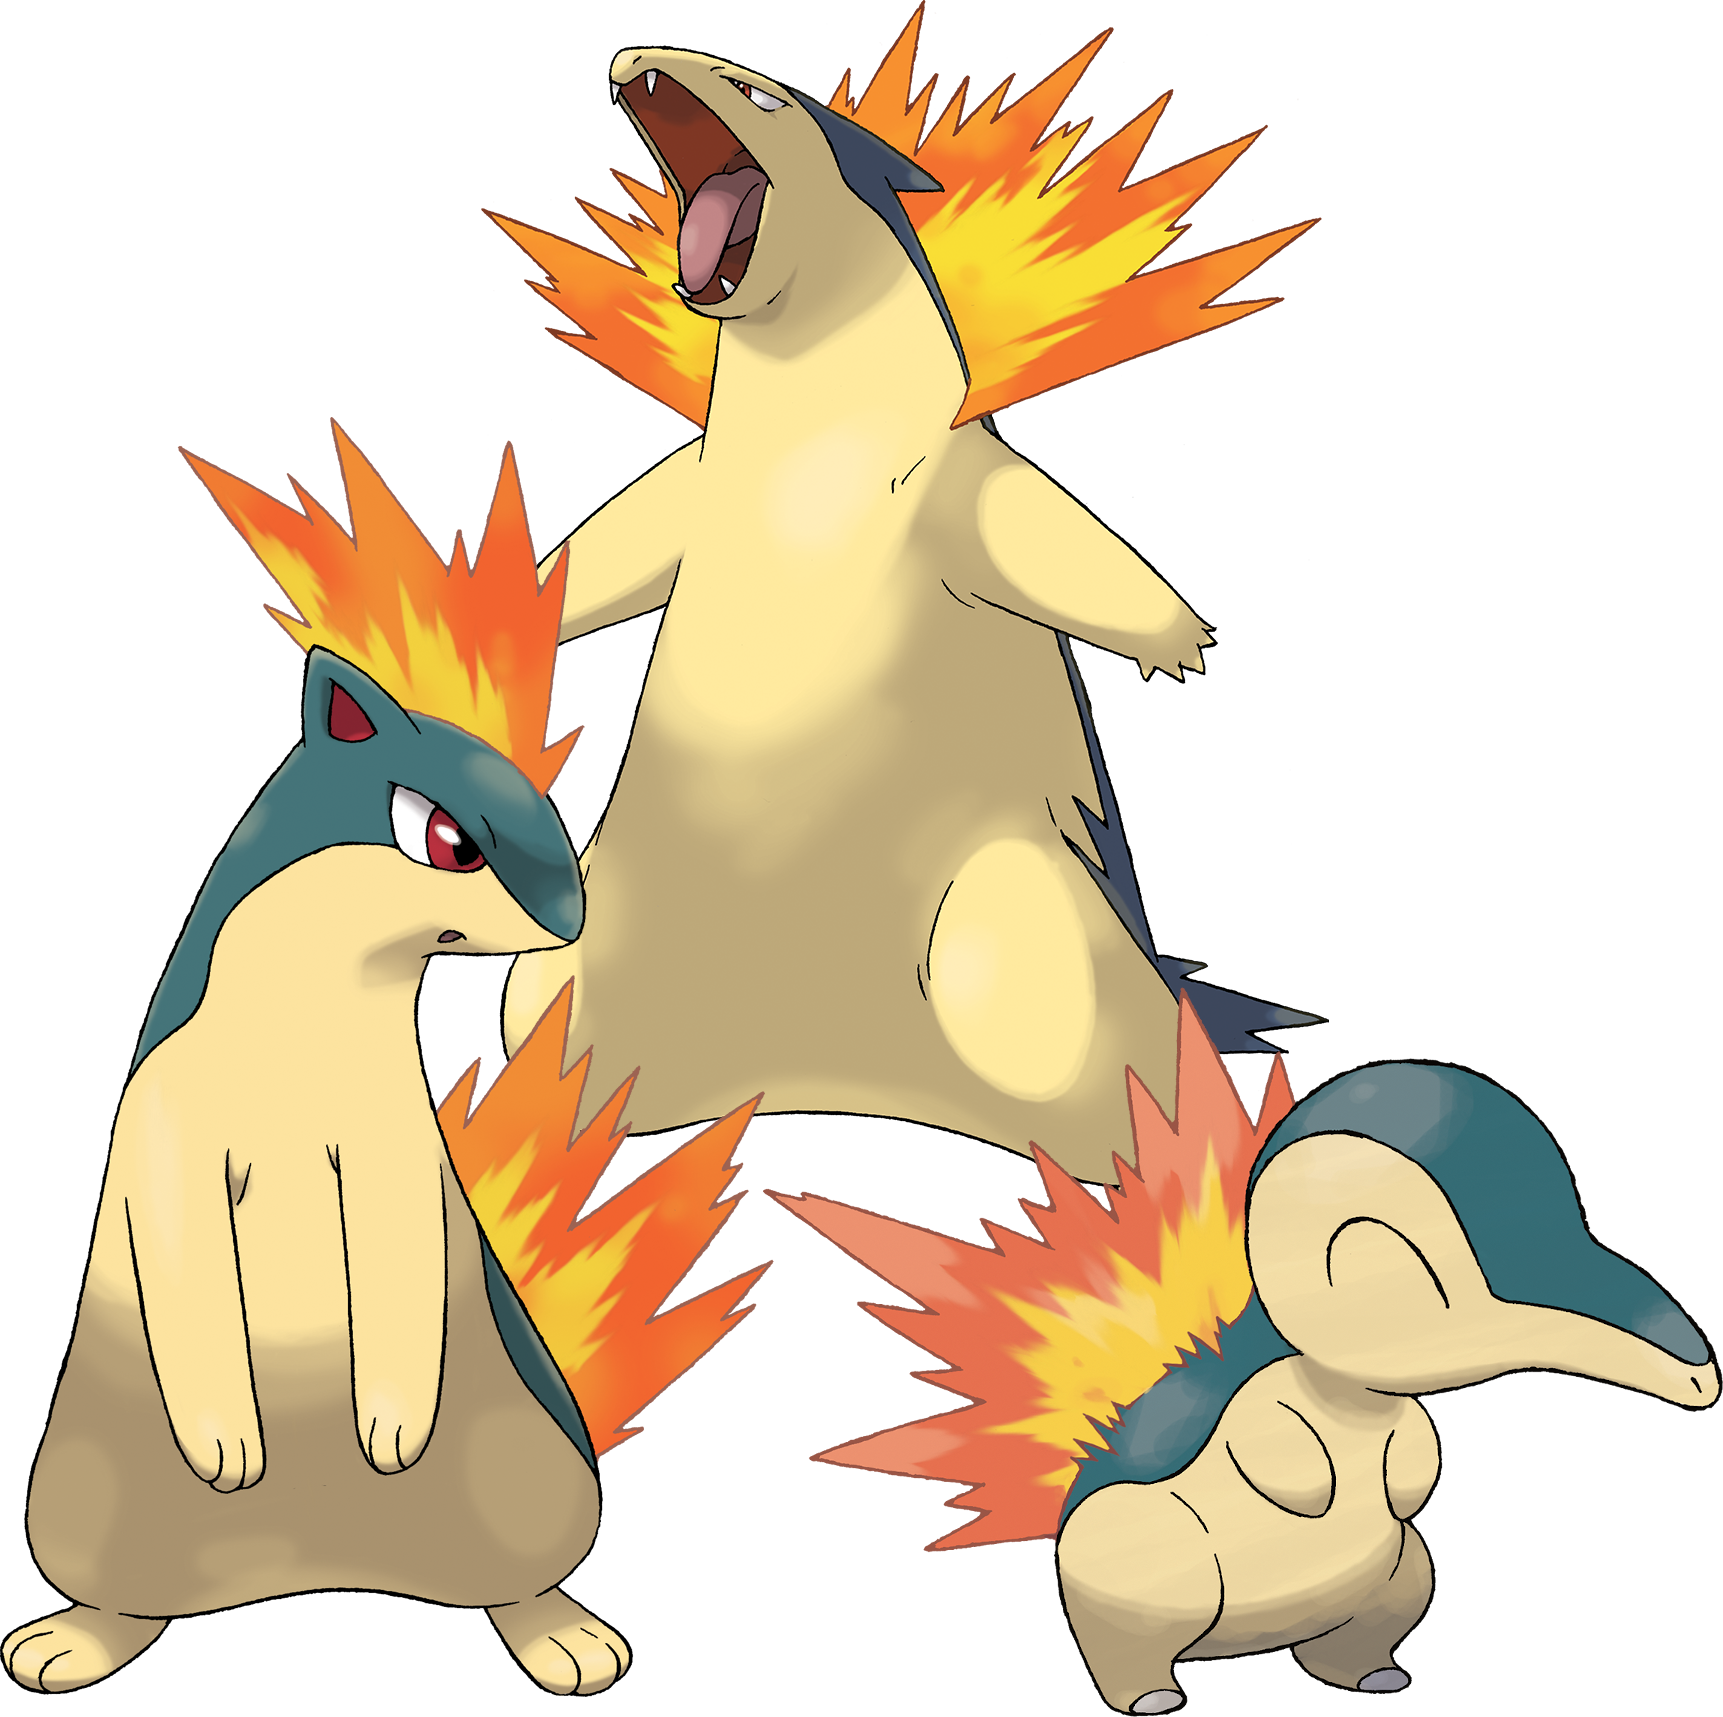 Cyndaquil, Quilava, and Typhlosion